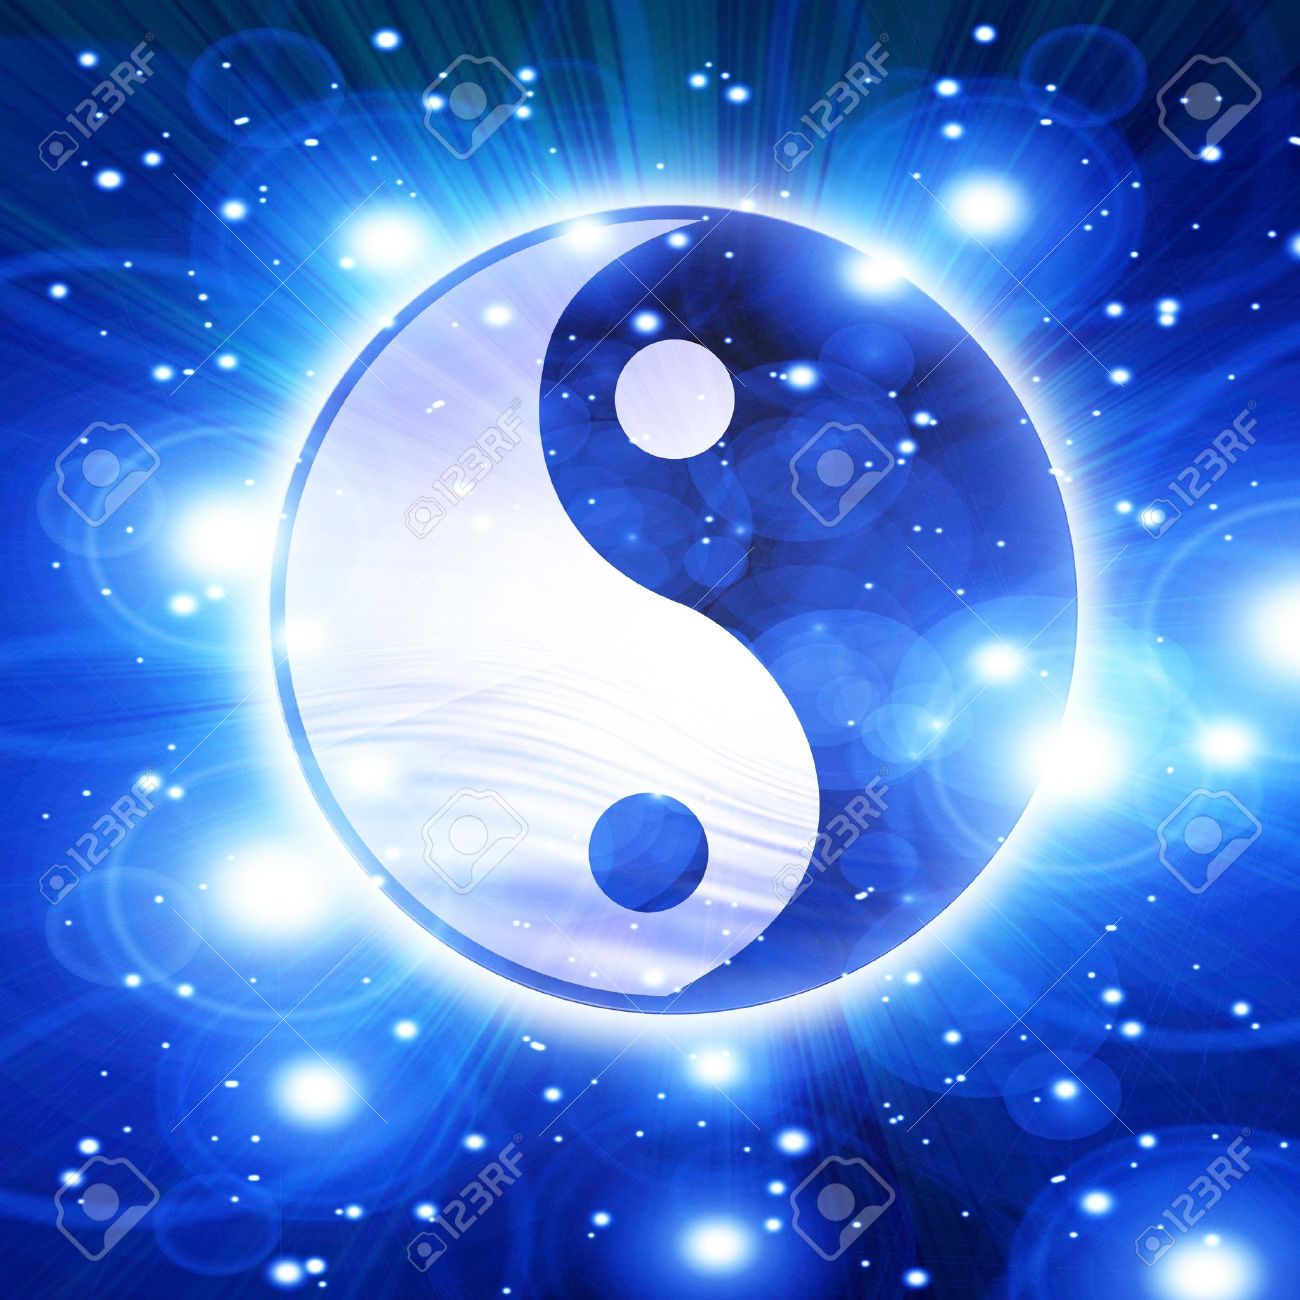 Yin Yang Symbol On A Soft Blue Background Stock Photo Picture And